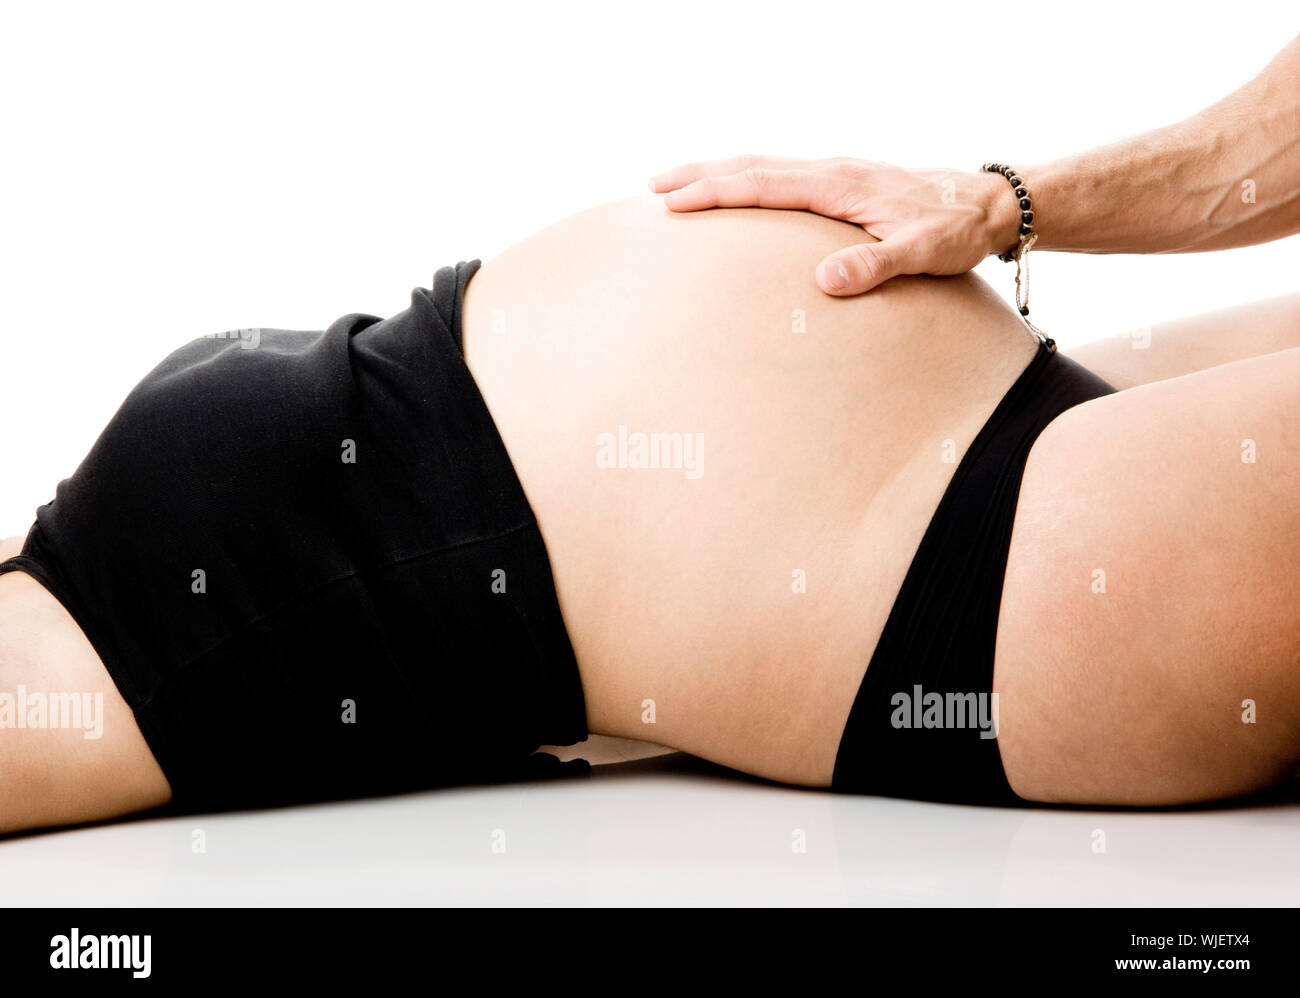 Man hand touch the tummy of a nine months pregnant woman Stock Photo